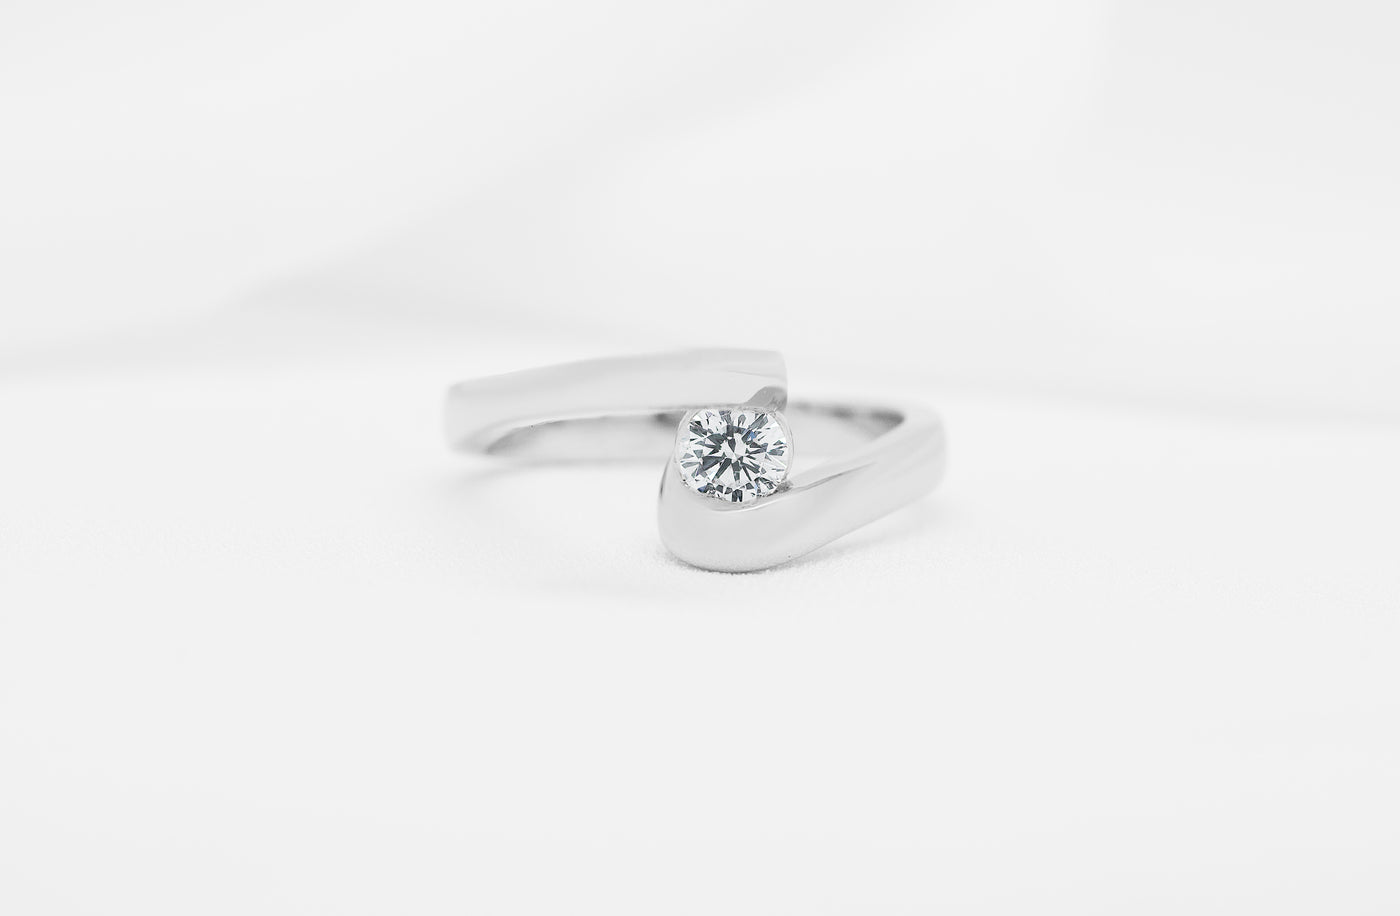 InspirRibbond: Brilliant Cut Diamond Solitaire Ring in Platinum | 0.29cted Collection, Diamond Ring, Jewellery, Jewelry, ring design, contemporary, modern, specialist, Platinum, 18k, 18ct, white gold, round brilliant cut, spiral, brilliant cut, tension setting, ribbon, ribbond, spike, peak, ready to go, ready to ship, 0.30ct, G colour, color, VS2 clarity